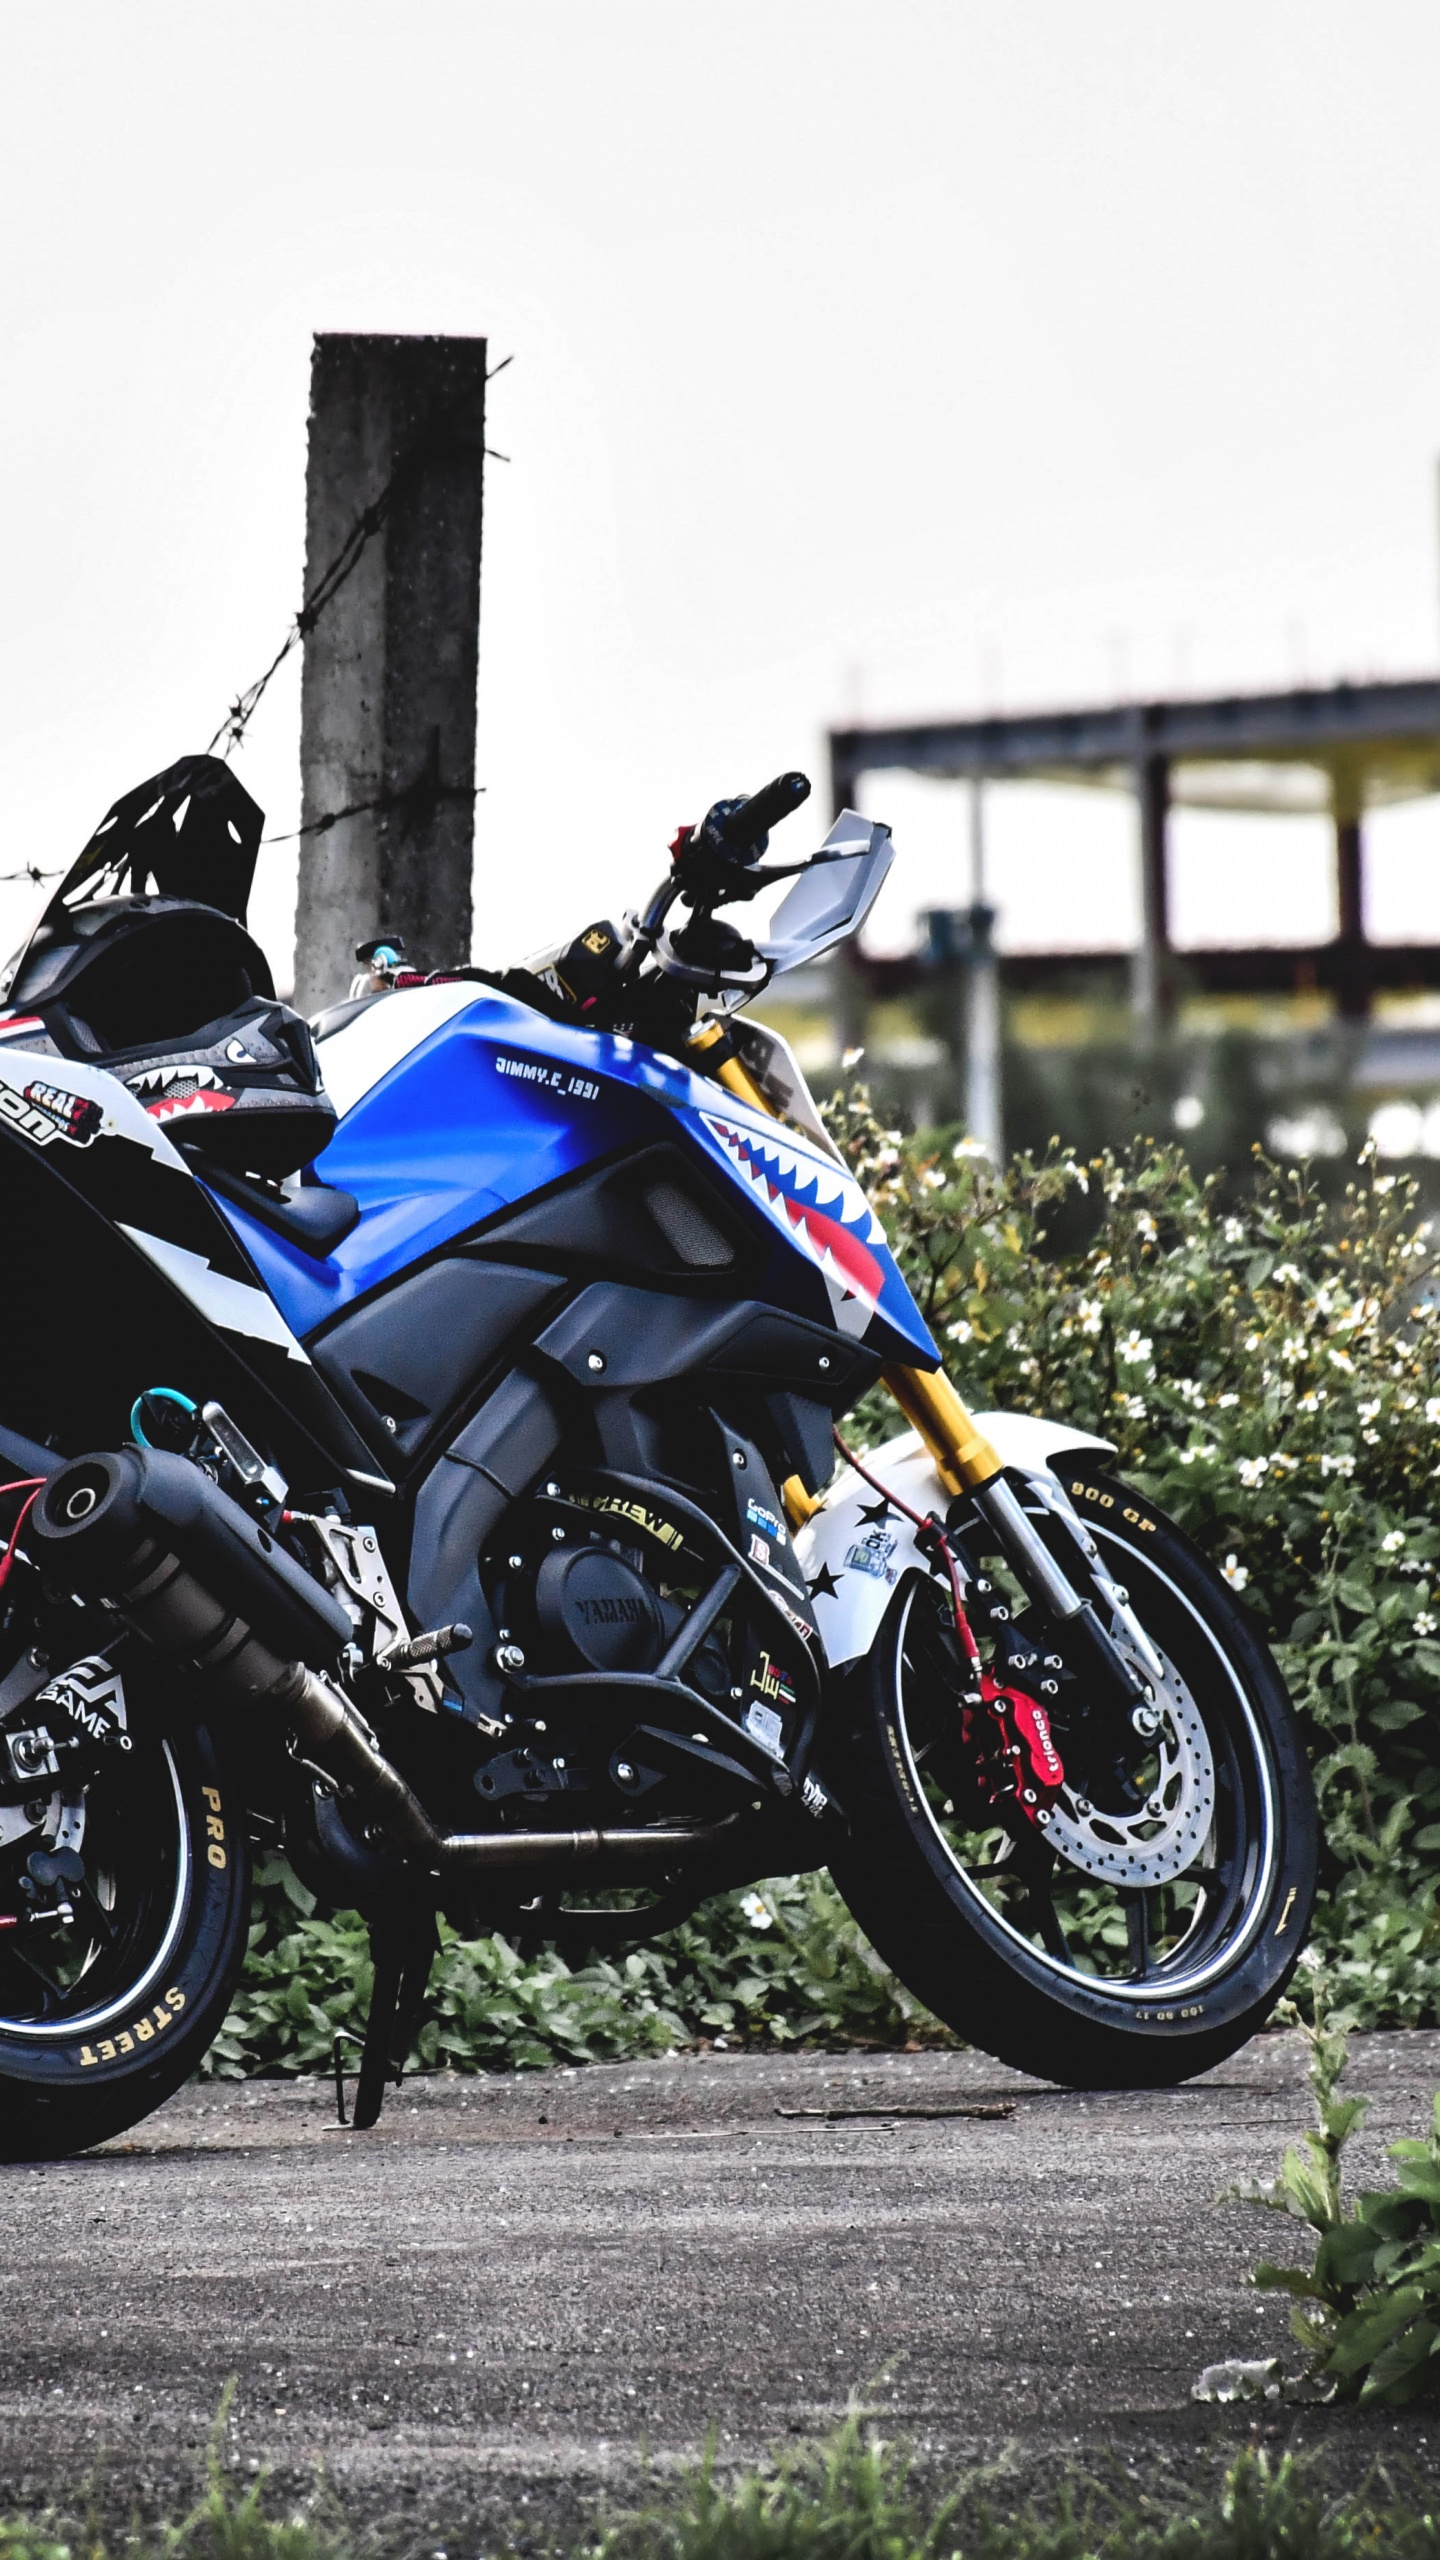 Black and Blue Sports Bike Parked on Gray Concrete Road During Daytime. Wallpaper in 1440x2560 Resolution